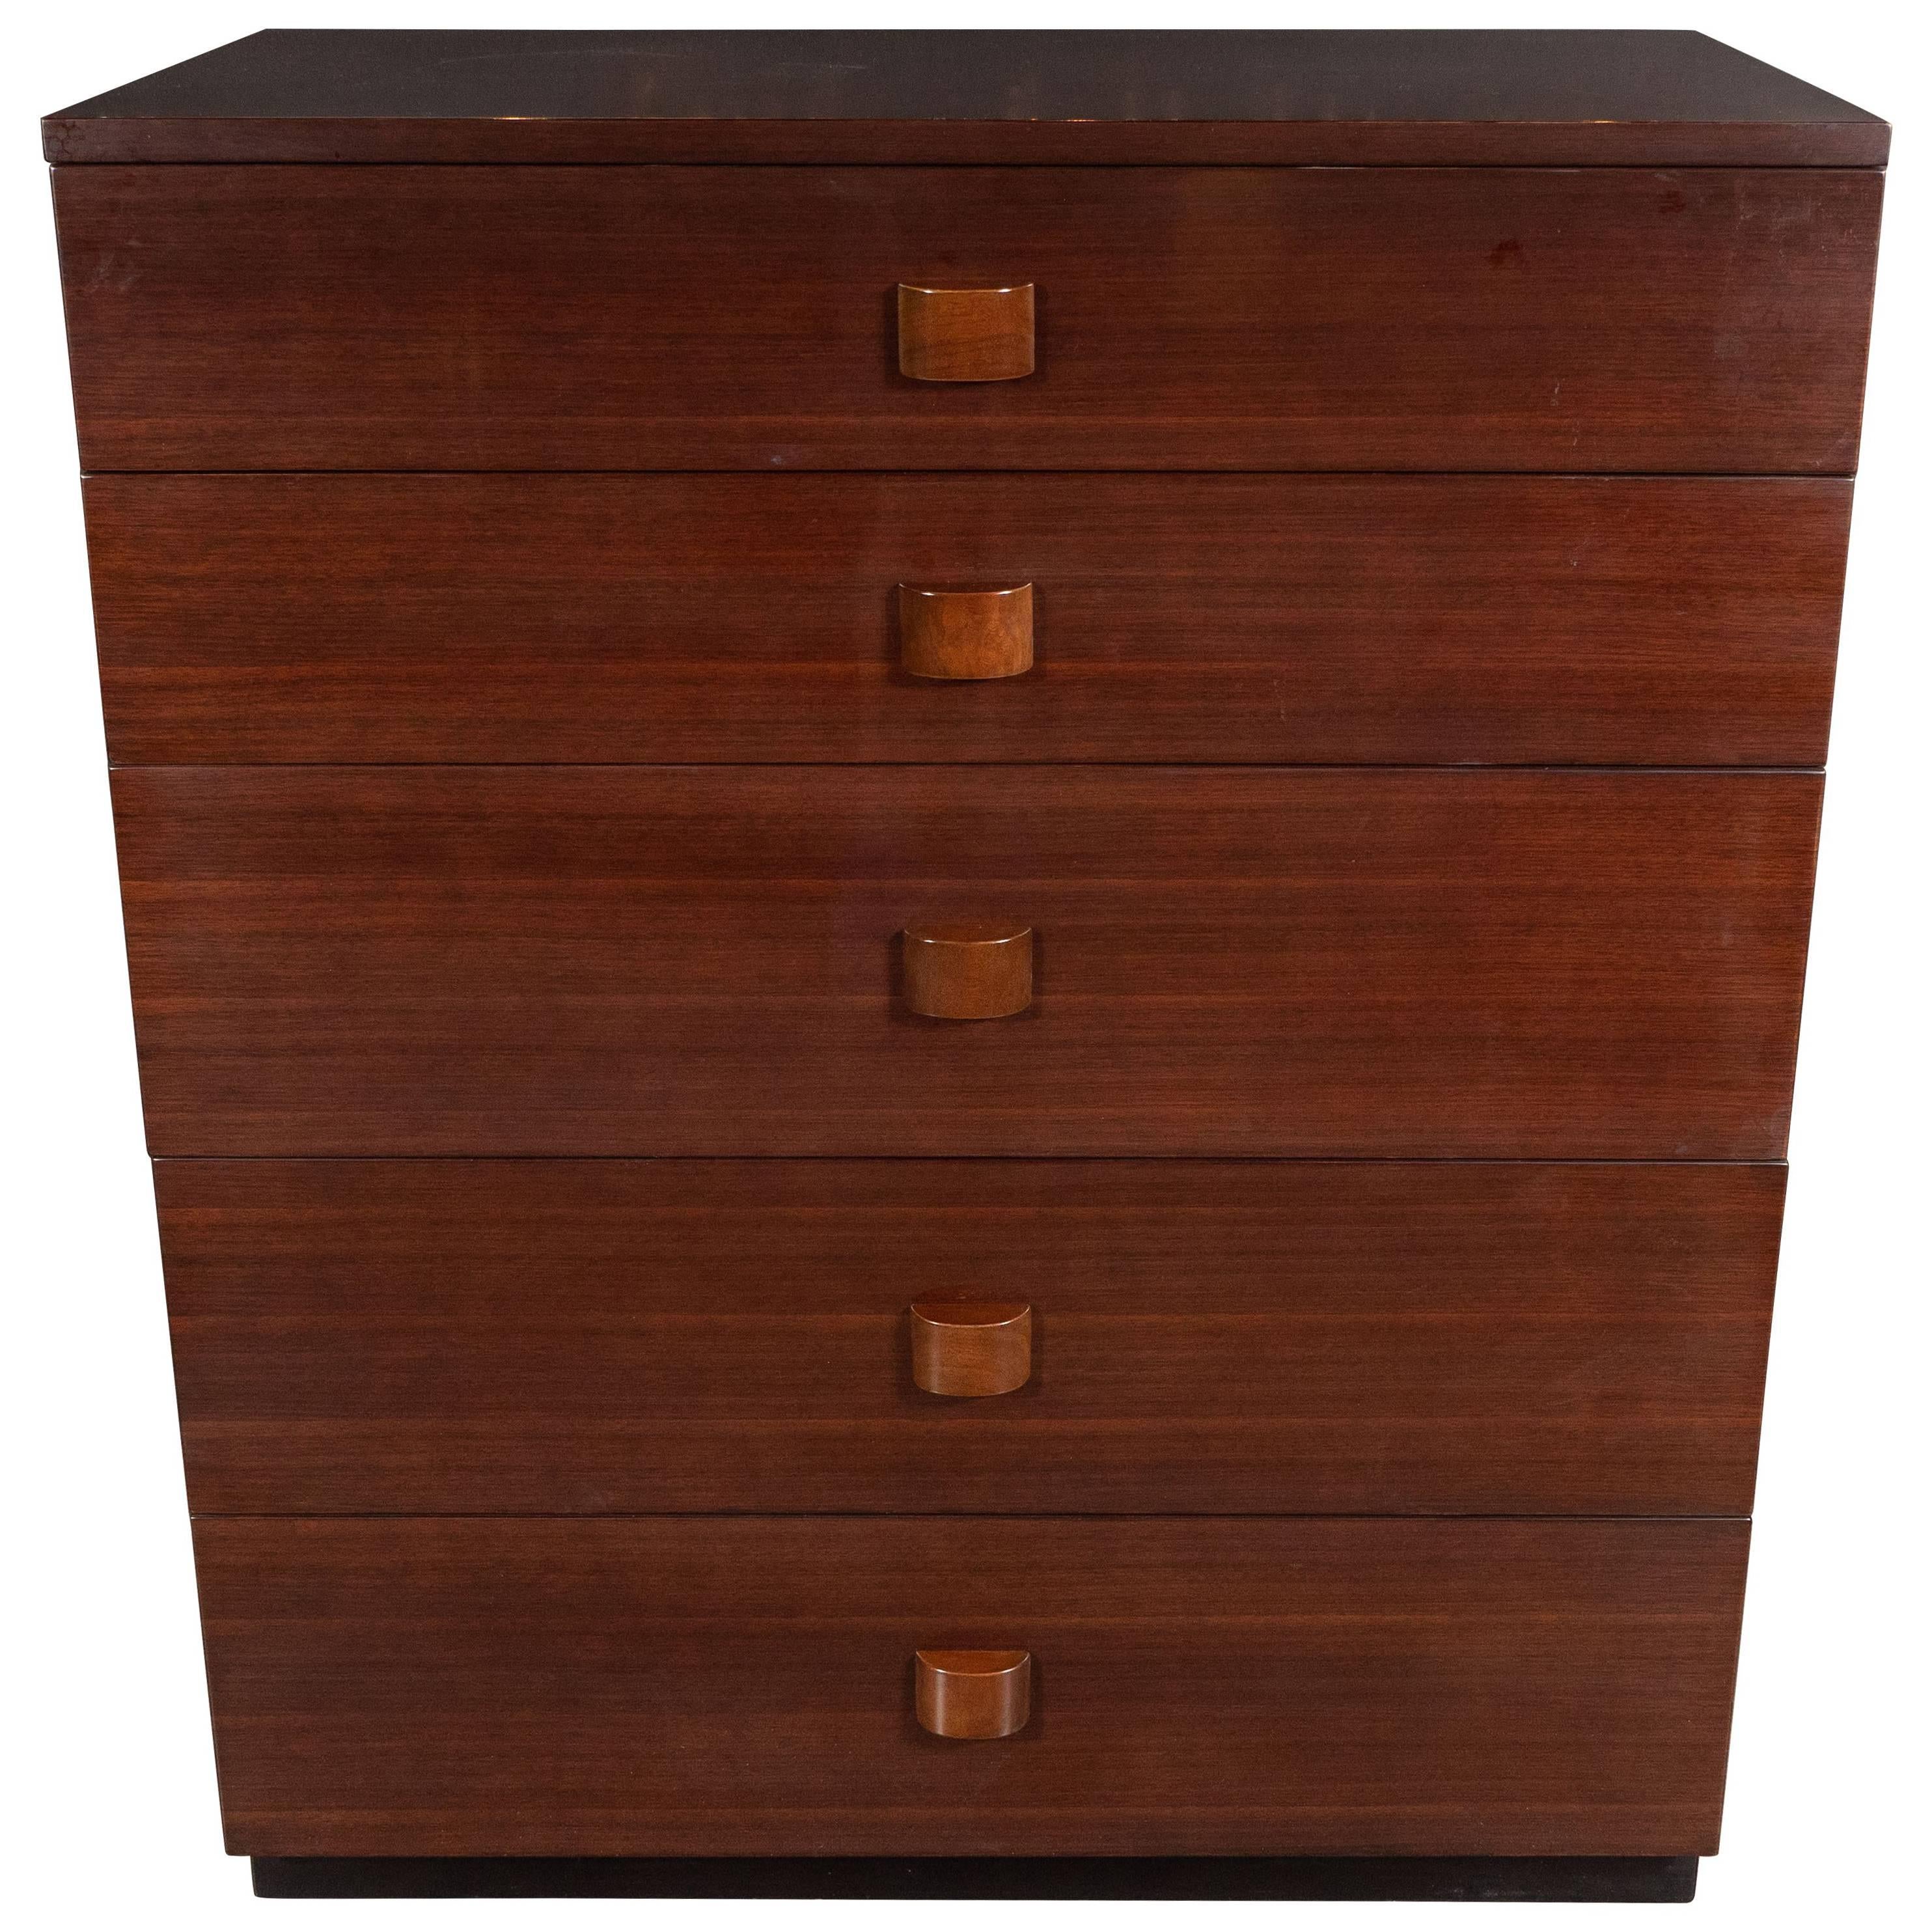 Midcentury Chest in Bookmatched Walnut by Gilbert Rohde for Herman Miller